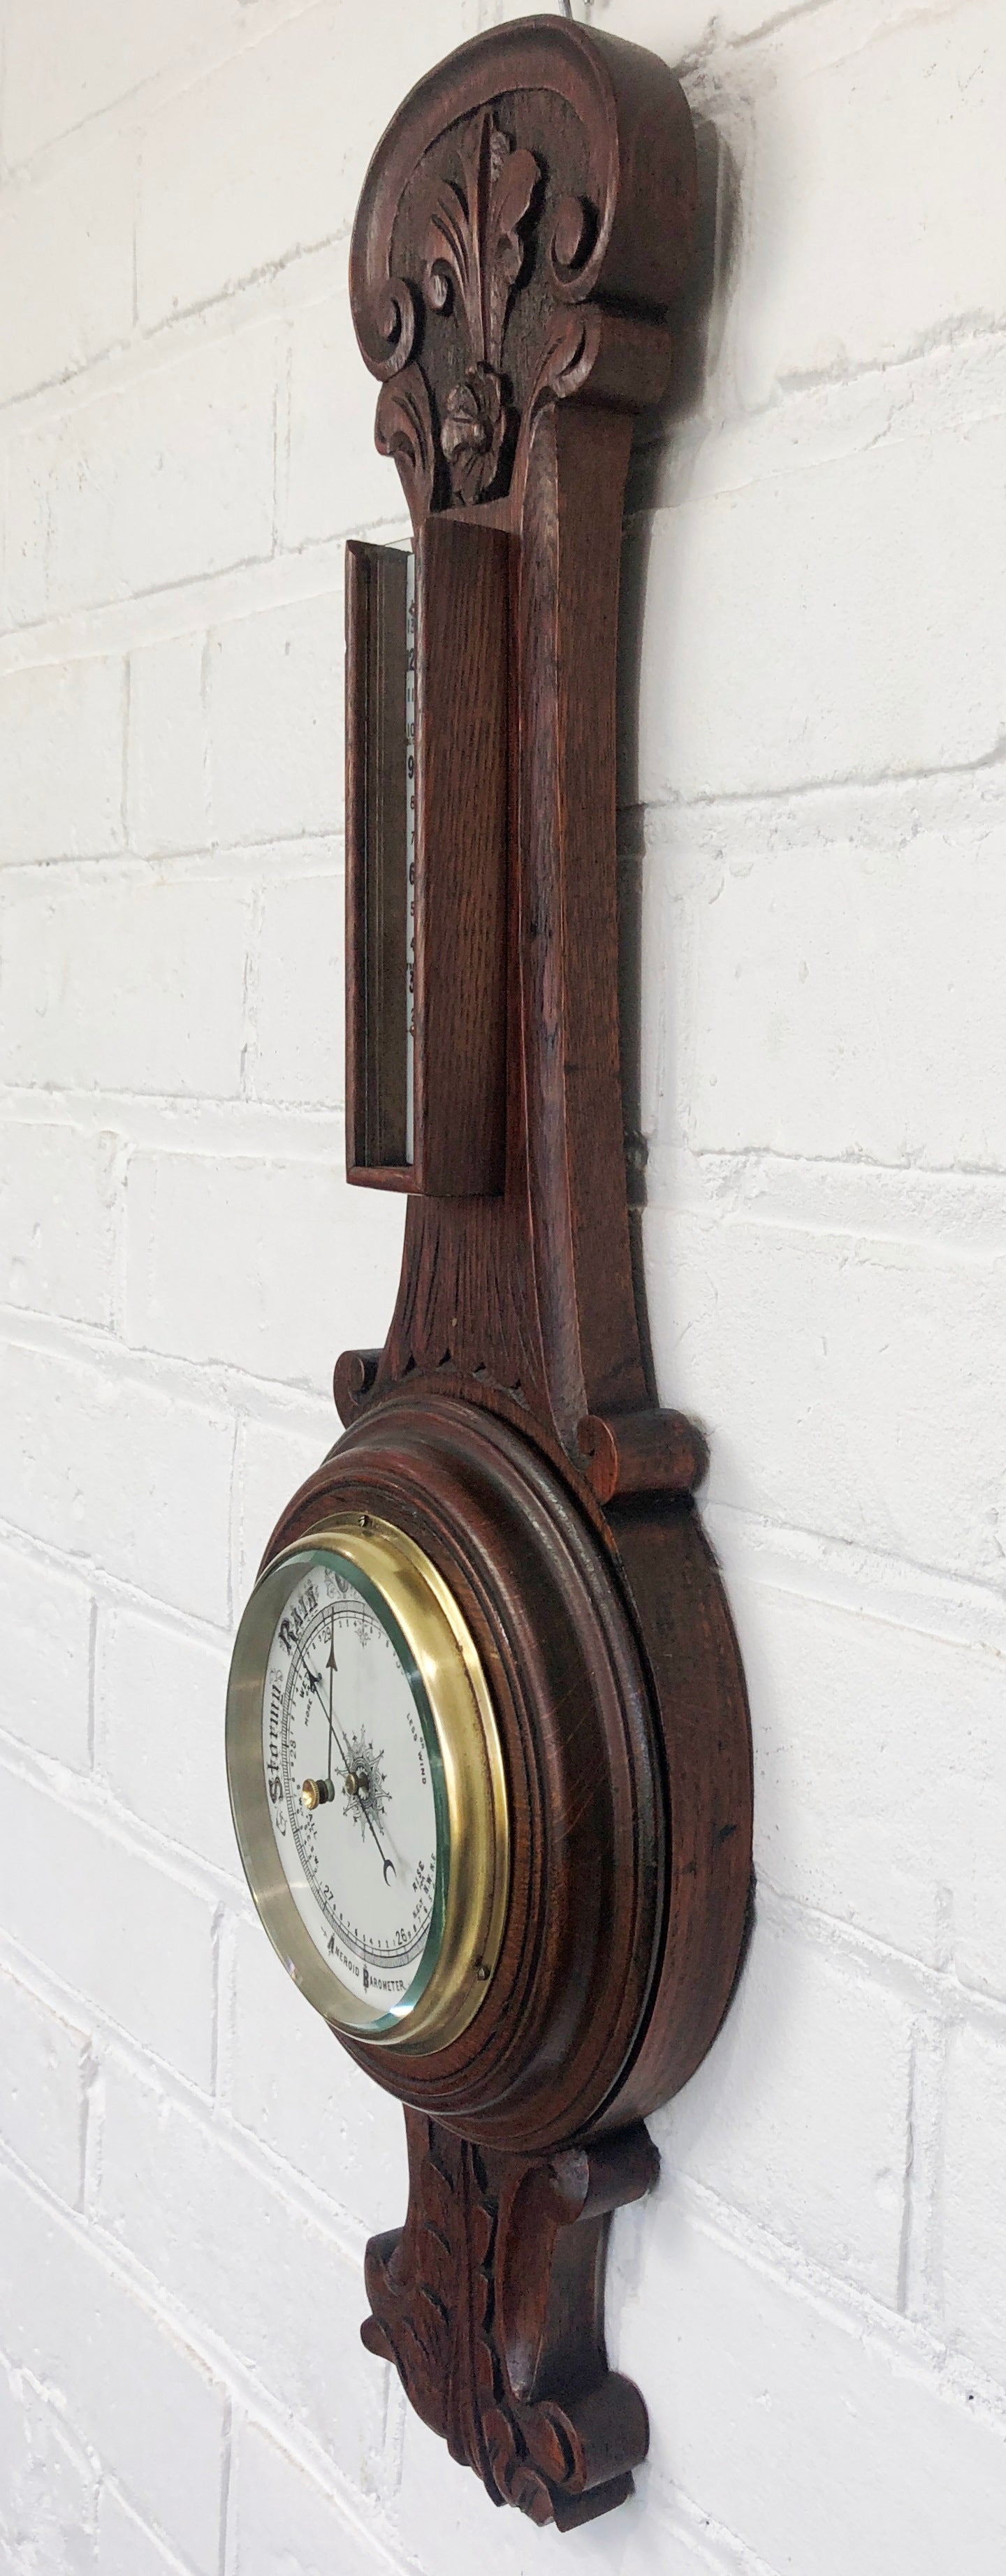 Original Vintage Wall Barometer & Thermometer | eXibit collection